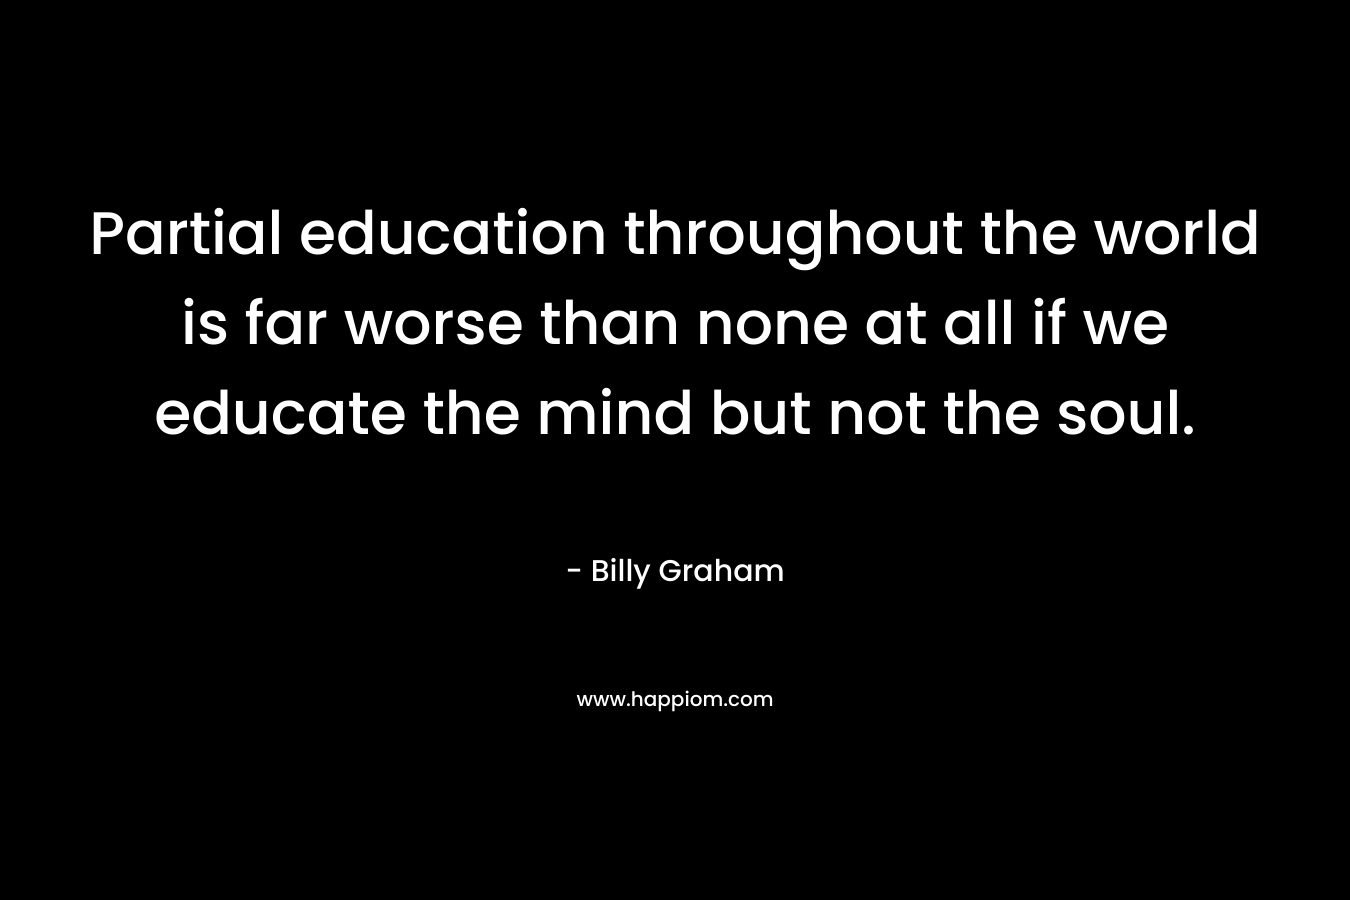 Partial education throughout the world is far worse than none at all if we educate the mind but not the soul.